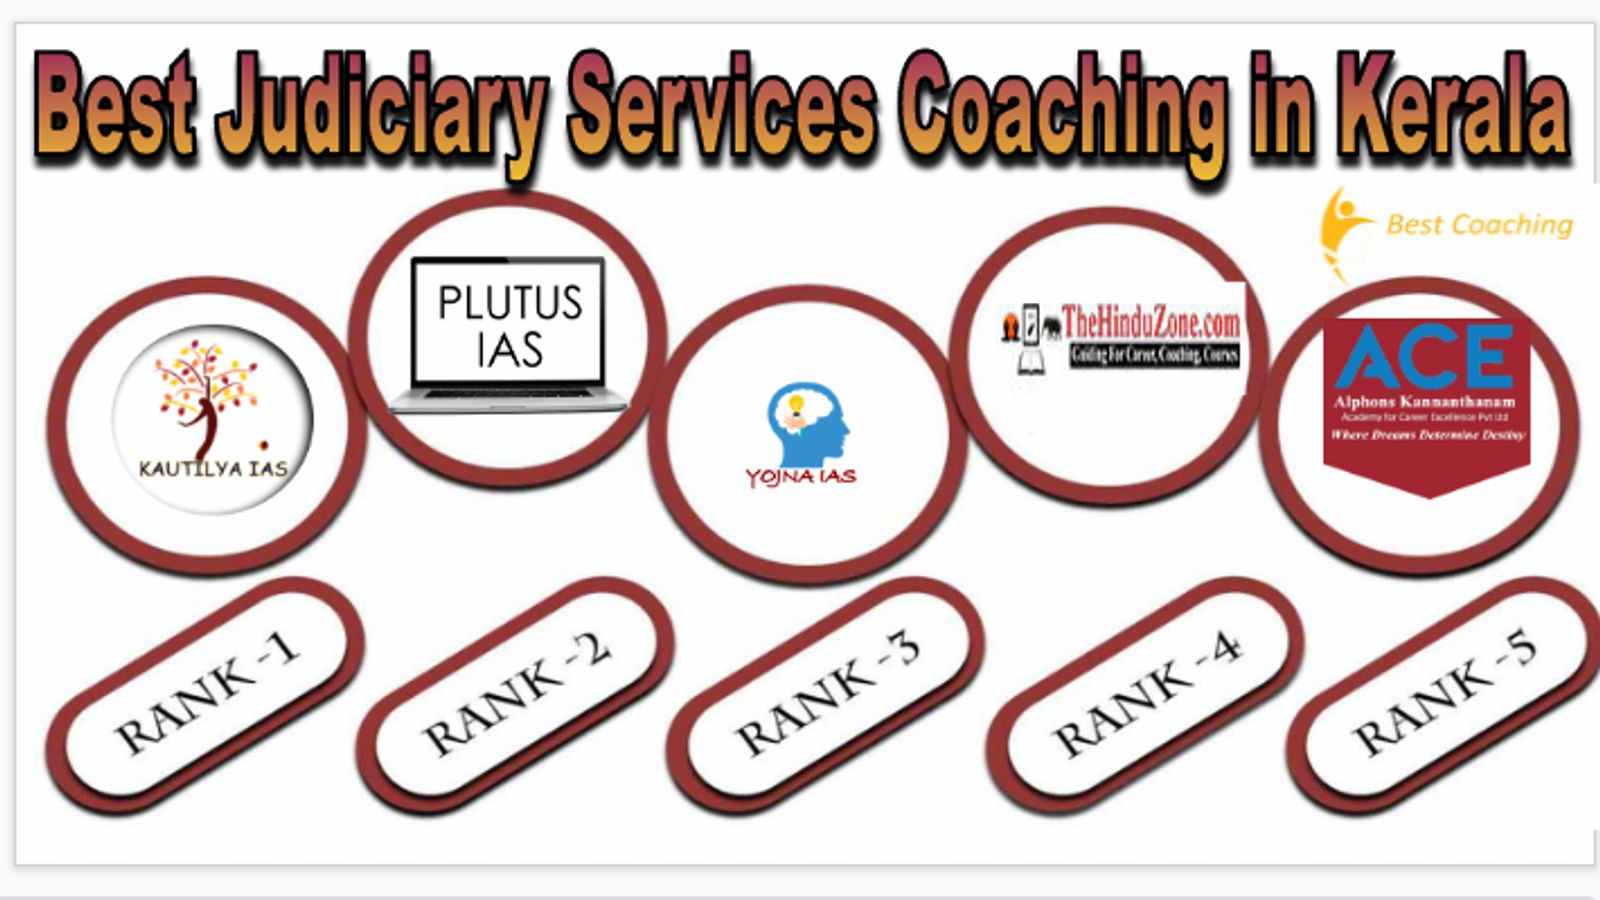 Best Judiciary Services Coaching in Kerala